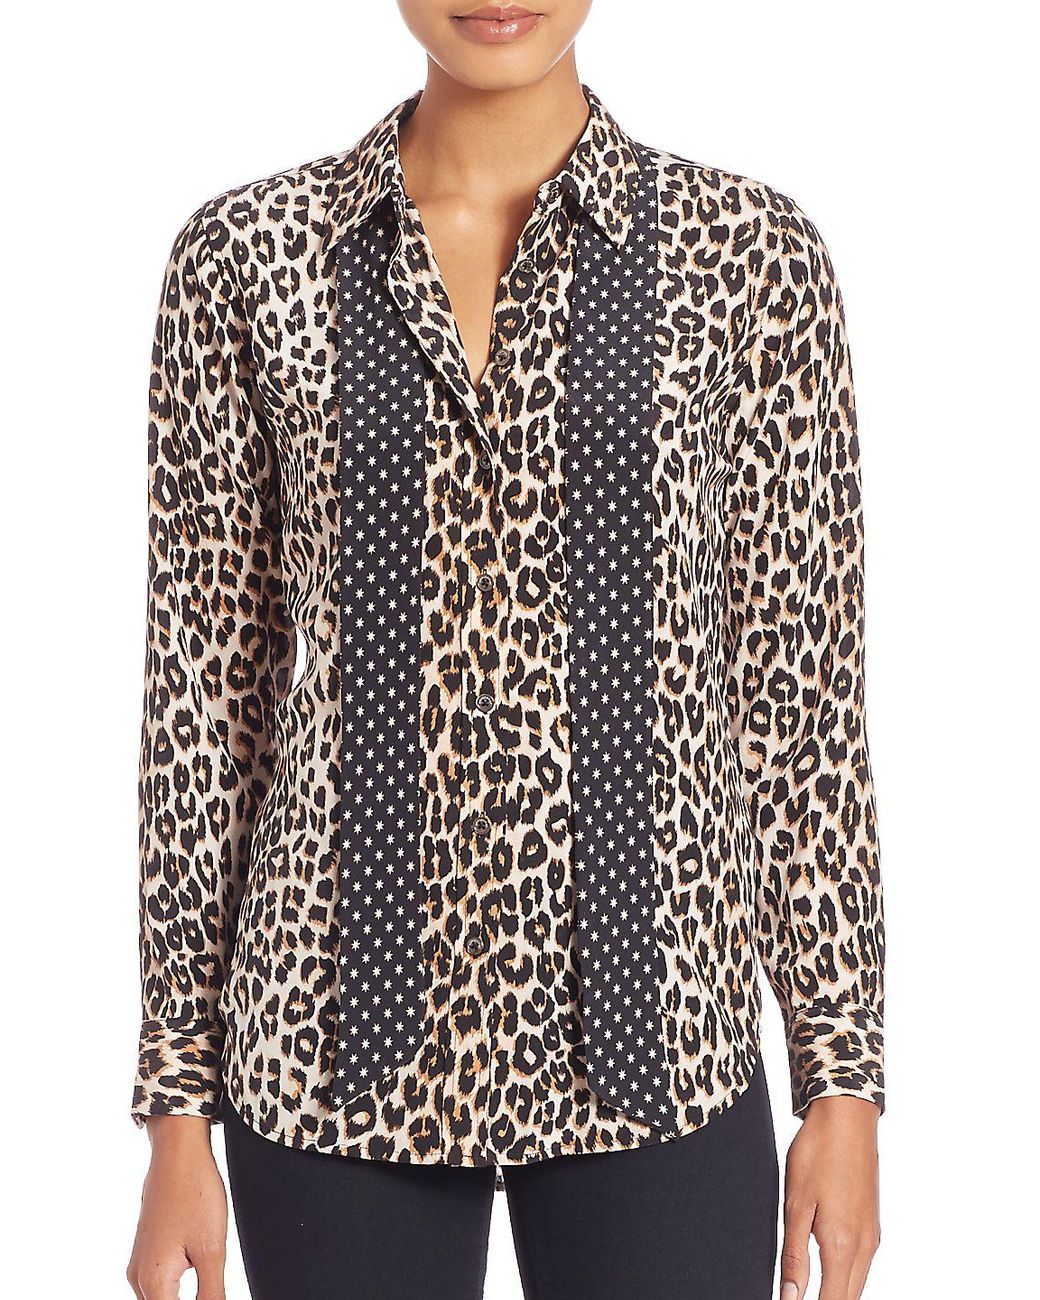 Equipment Kate Moss For Pussy Bow Shirt | Lyst